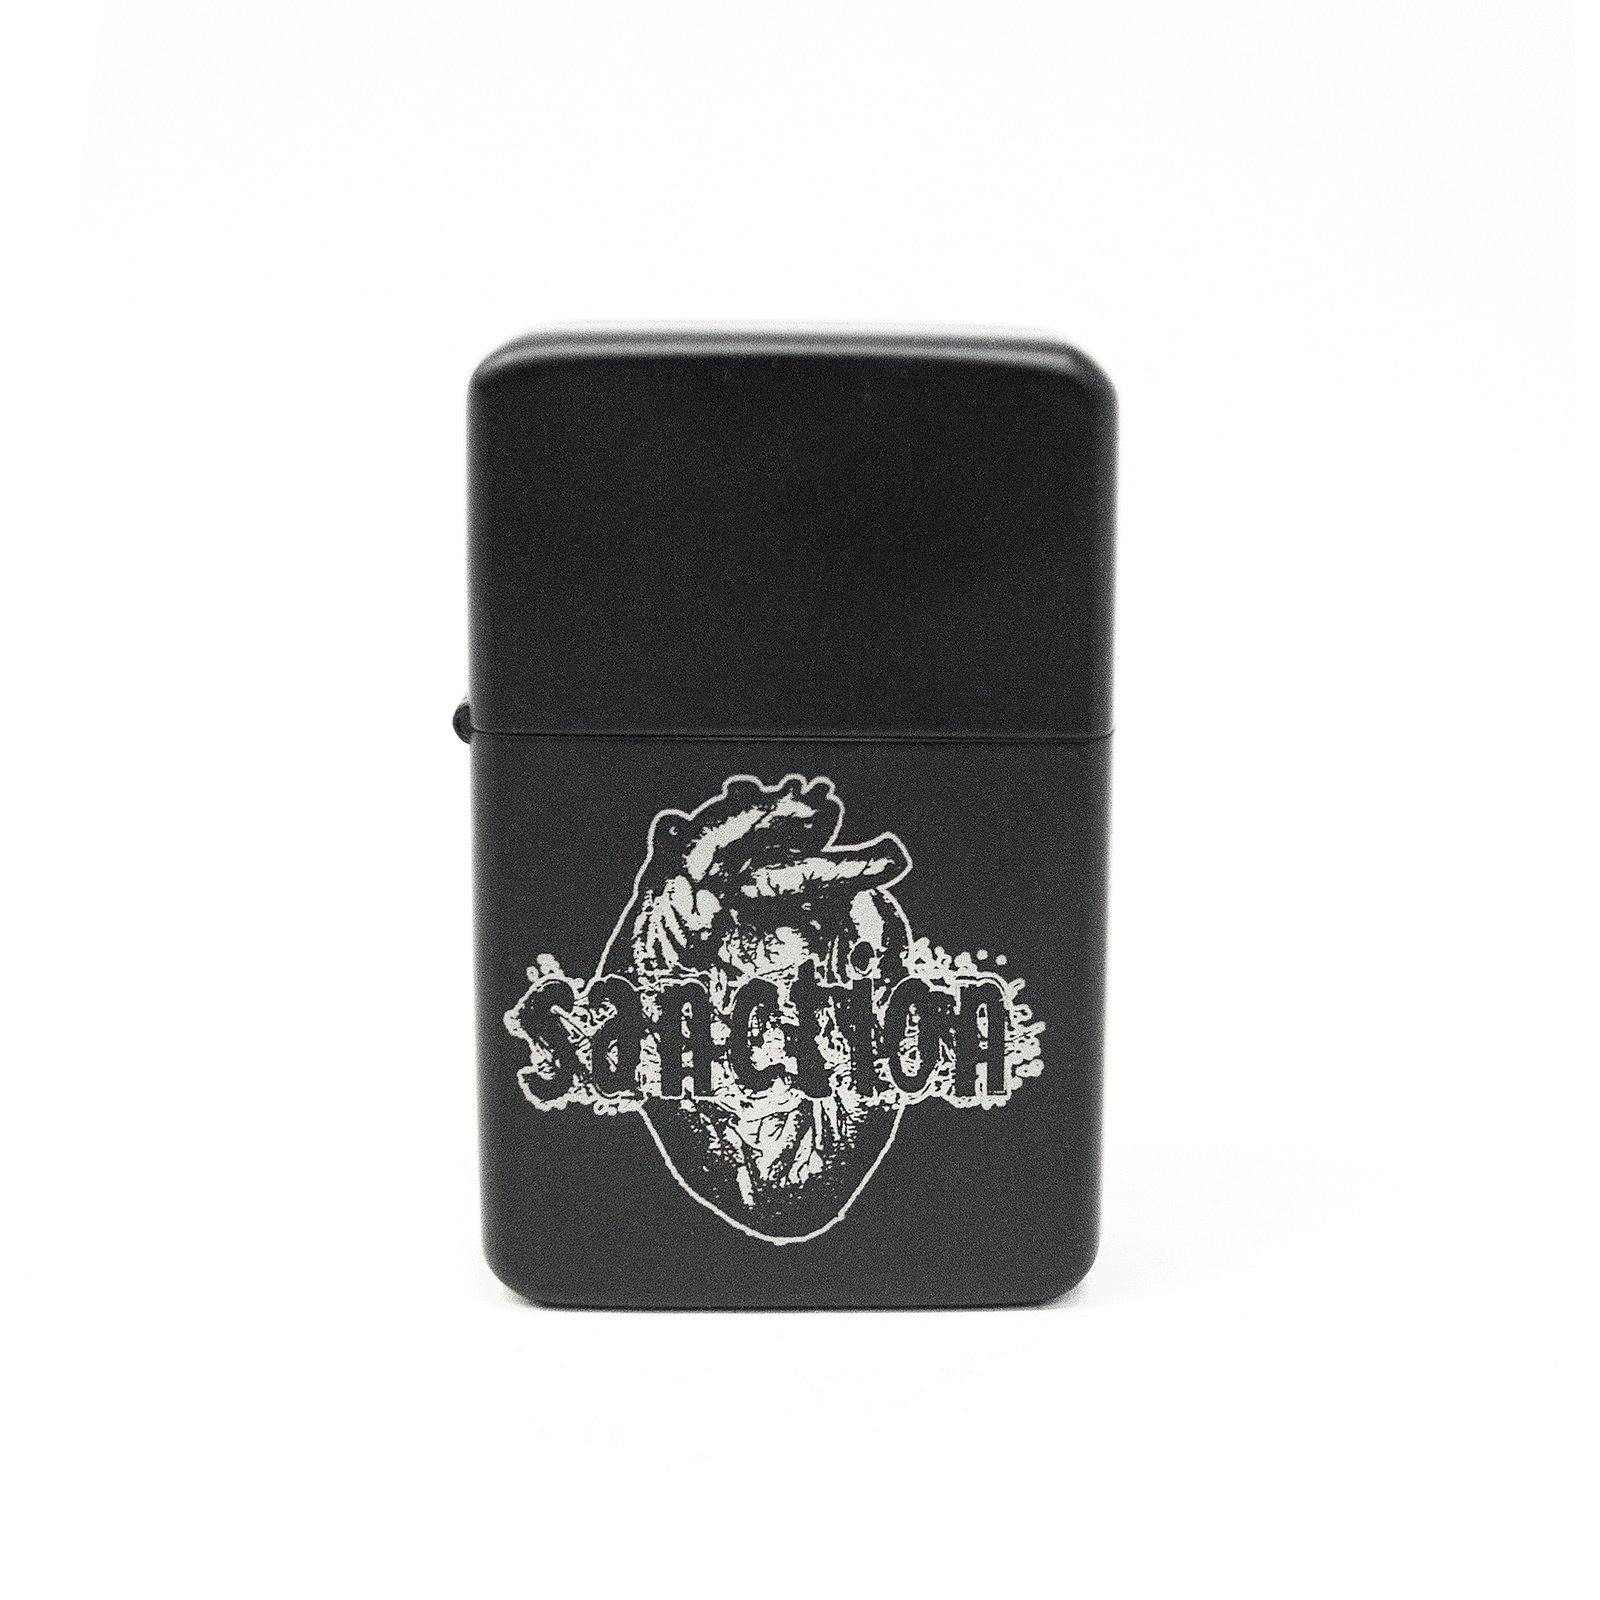 Buy – Sanction "Logo" Knife and Lighter – Band & Music Merch – Cold Cuts Merch